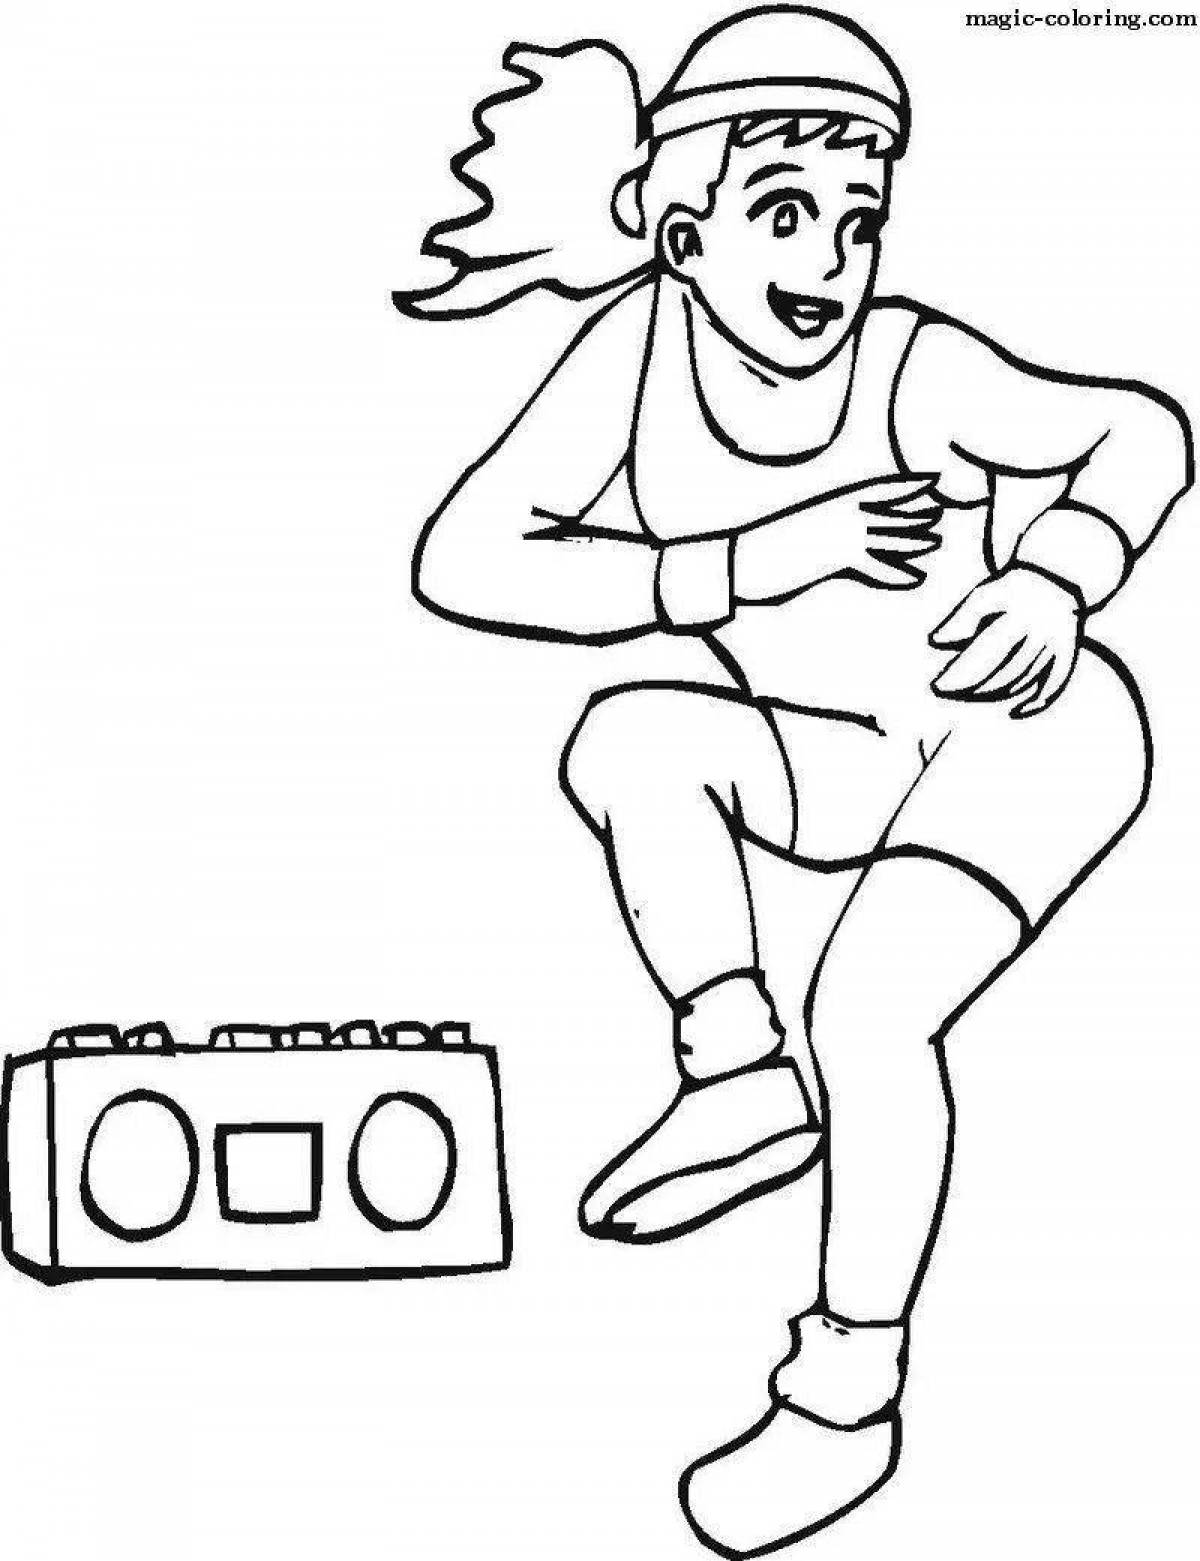 Creative exercise and sports coloring book